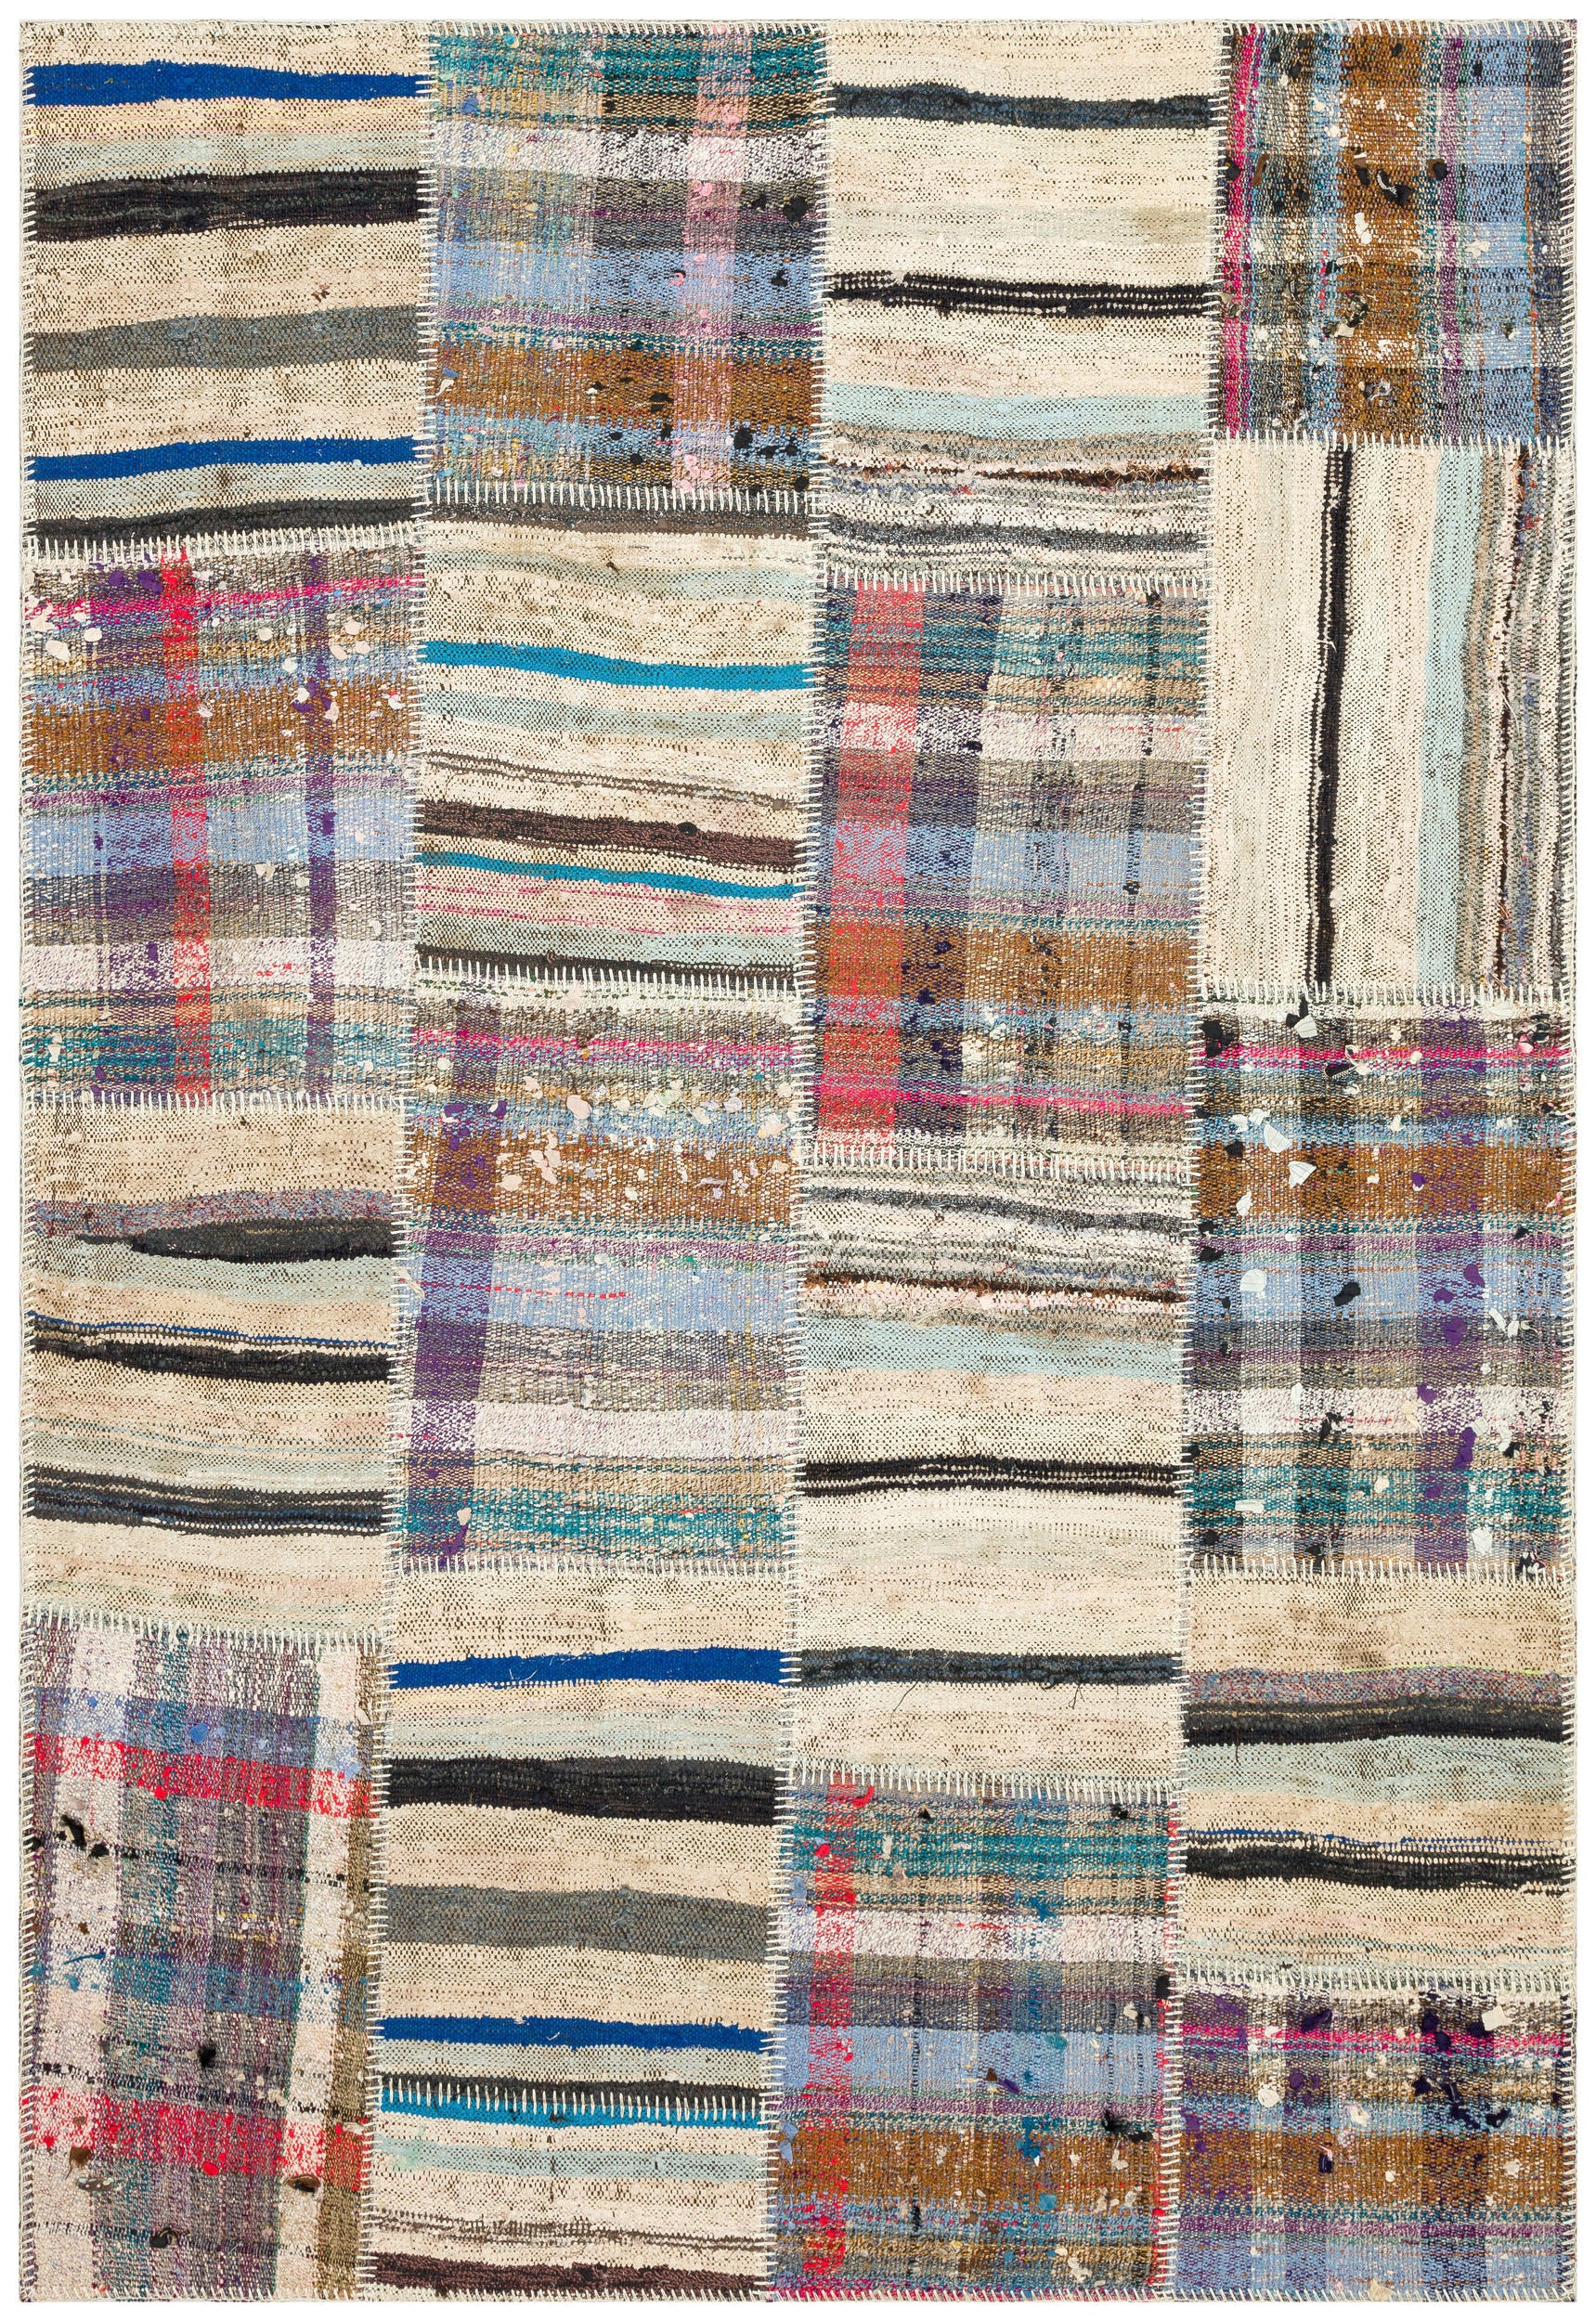 Striped Over Dyed Kilim Patchwork Unique Rug 5'1'' x 7'7'' ft 156 x 231 cm